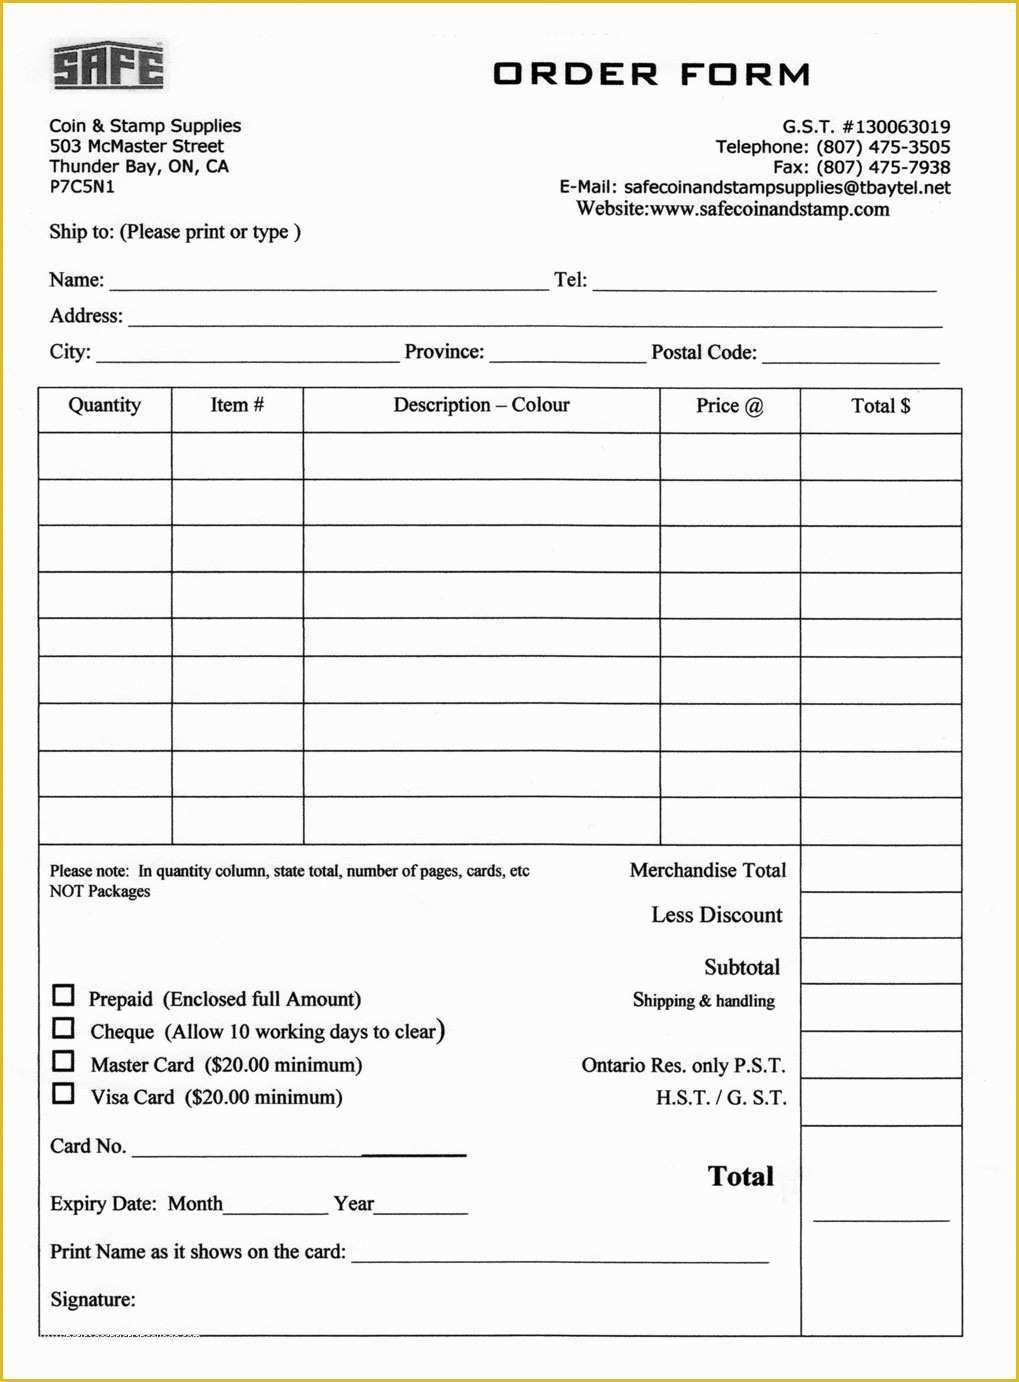 Free Purchase order form Template Word Of 5 Free order form Templates Word Excel Pdf formats